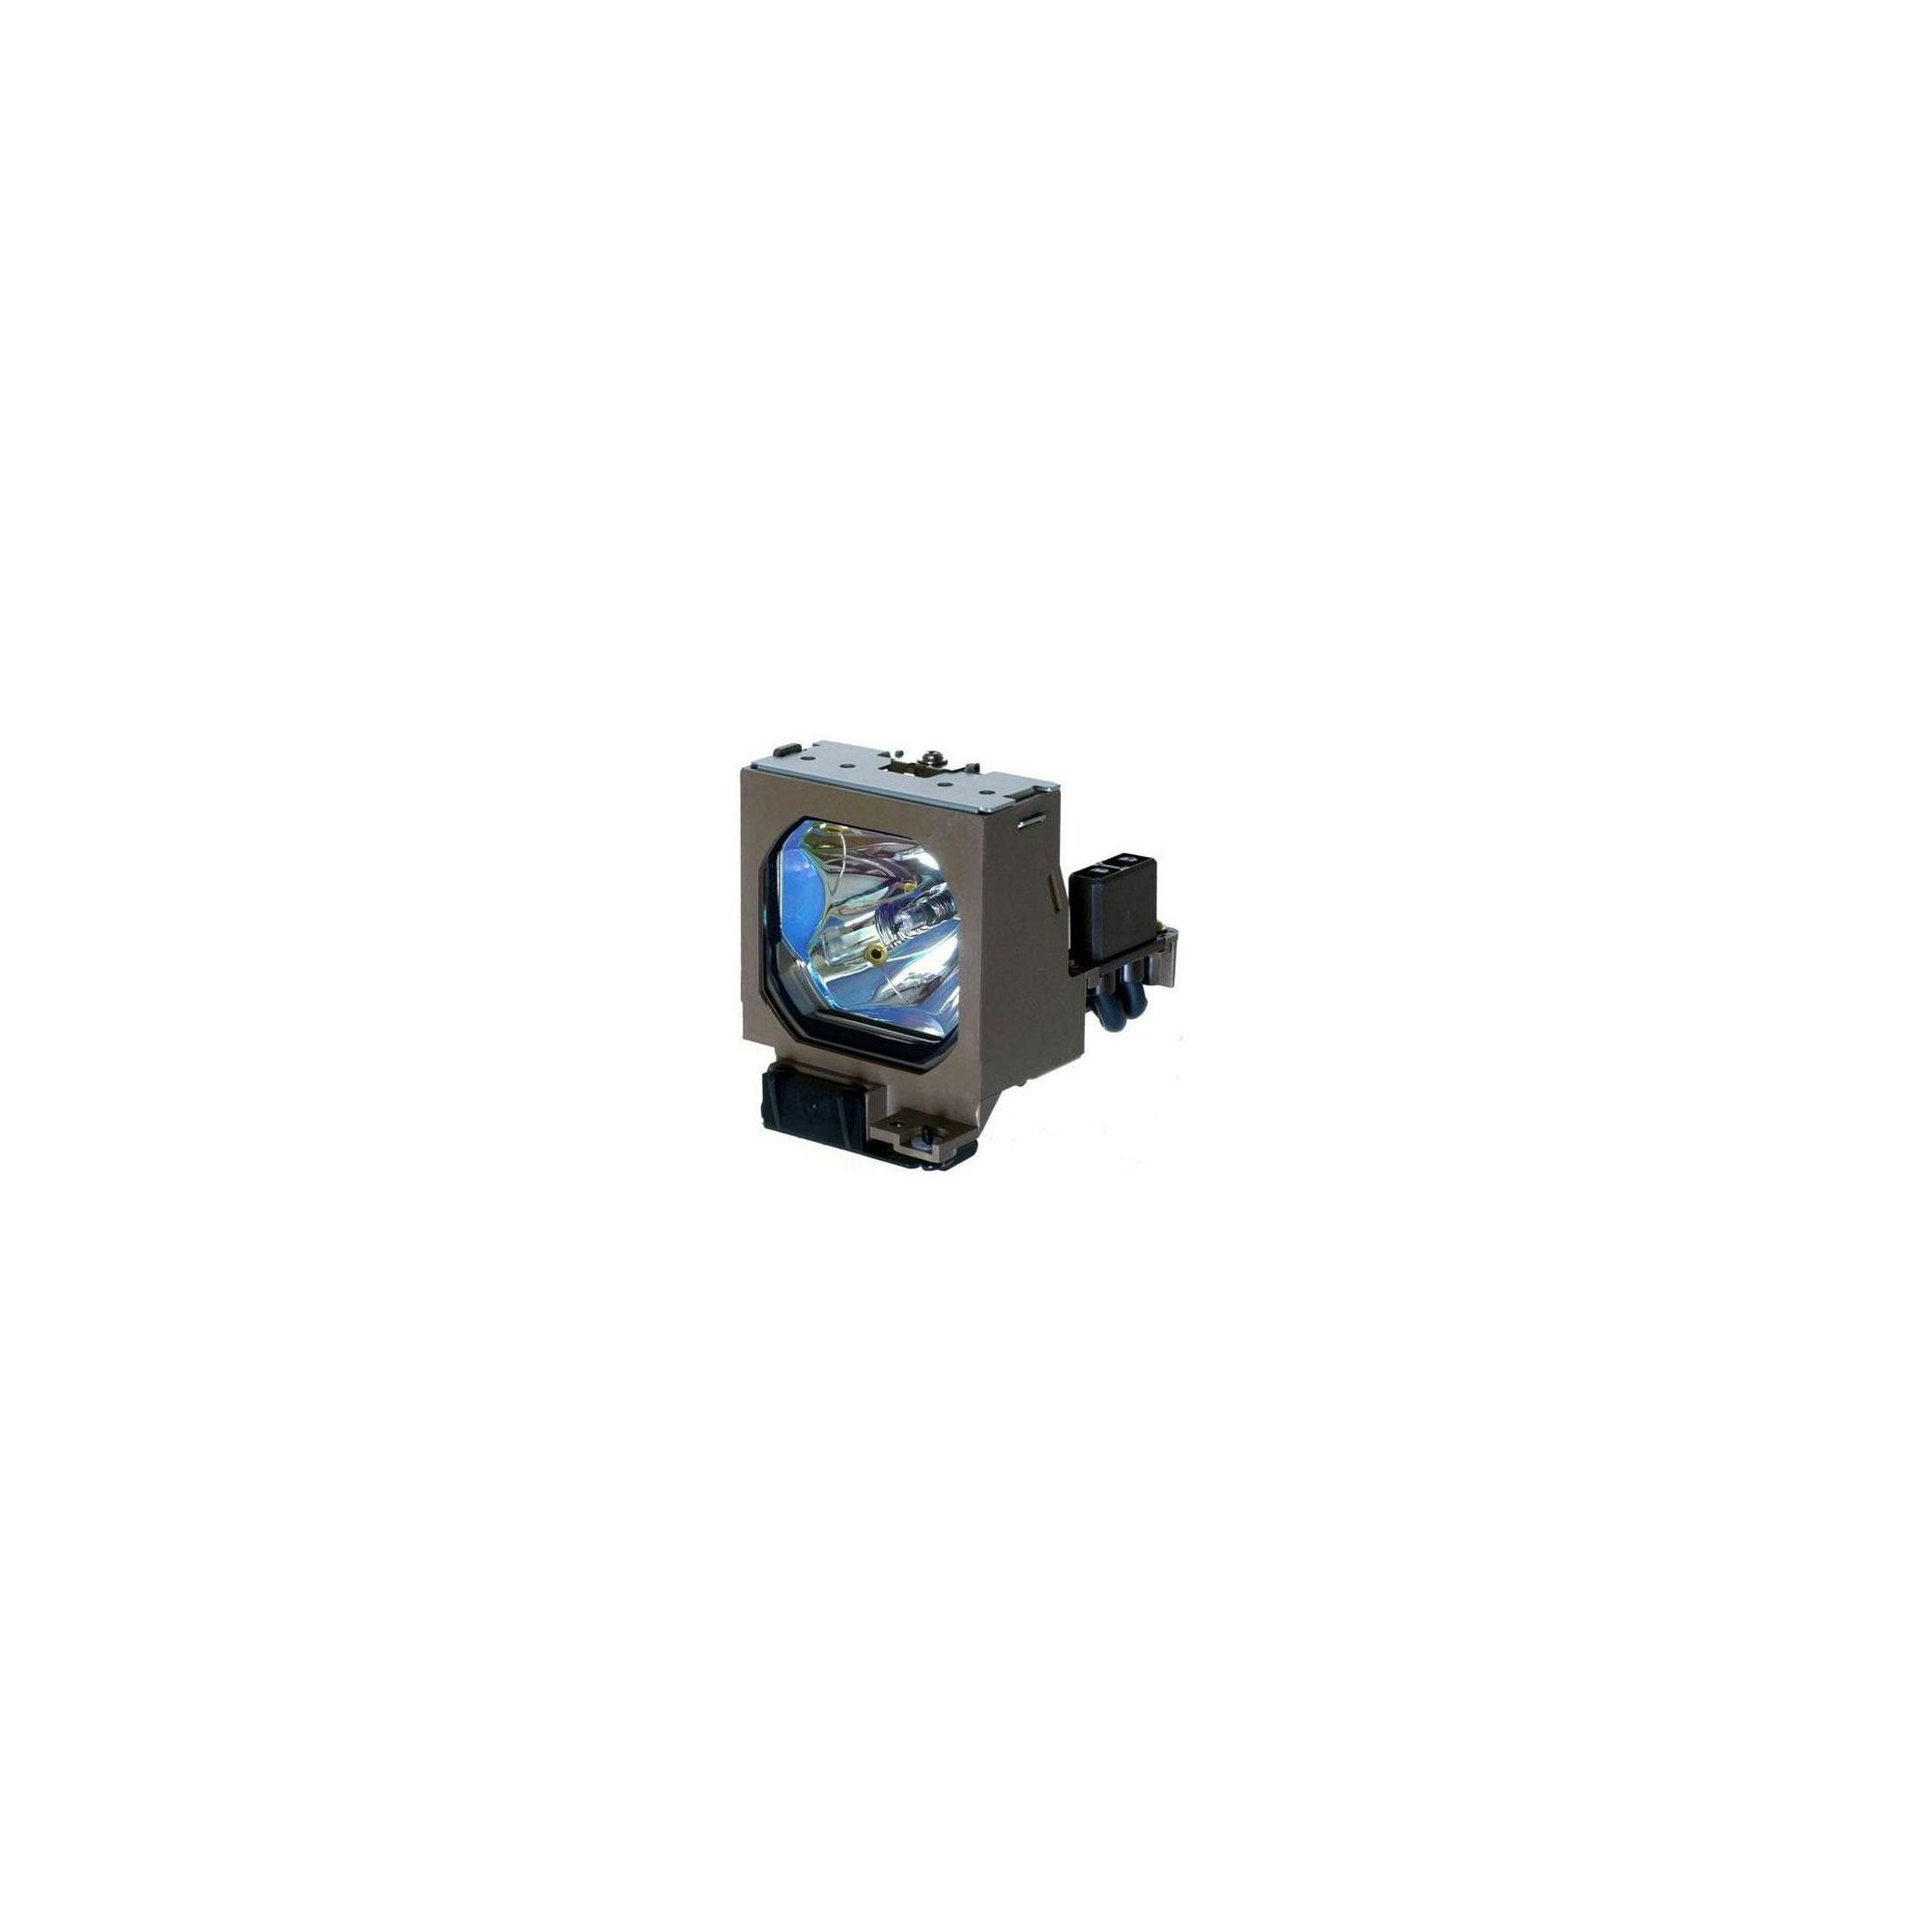 Sony LMP-P201 Replacement Projector Lamp for VPL-VW12HT Projector at Tesco Direct